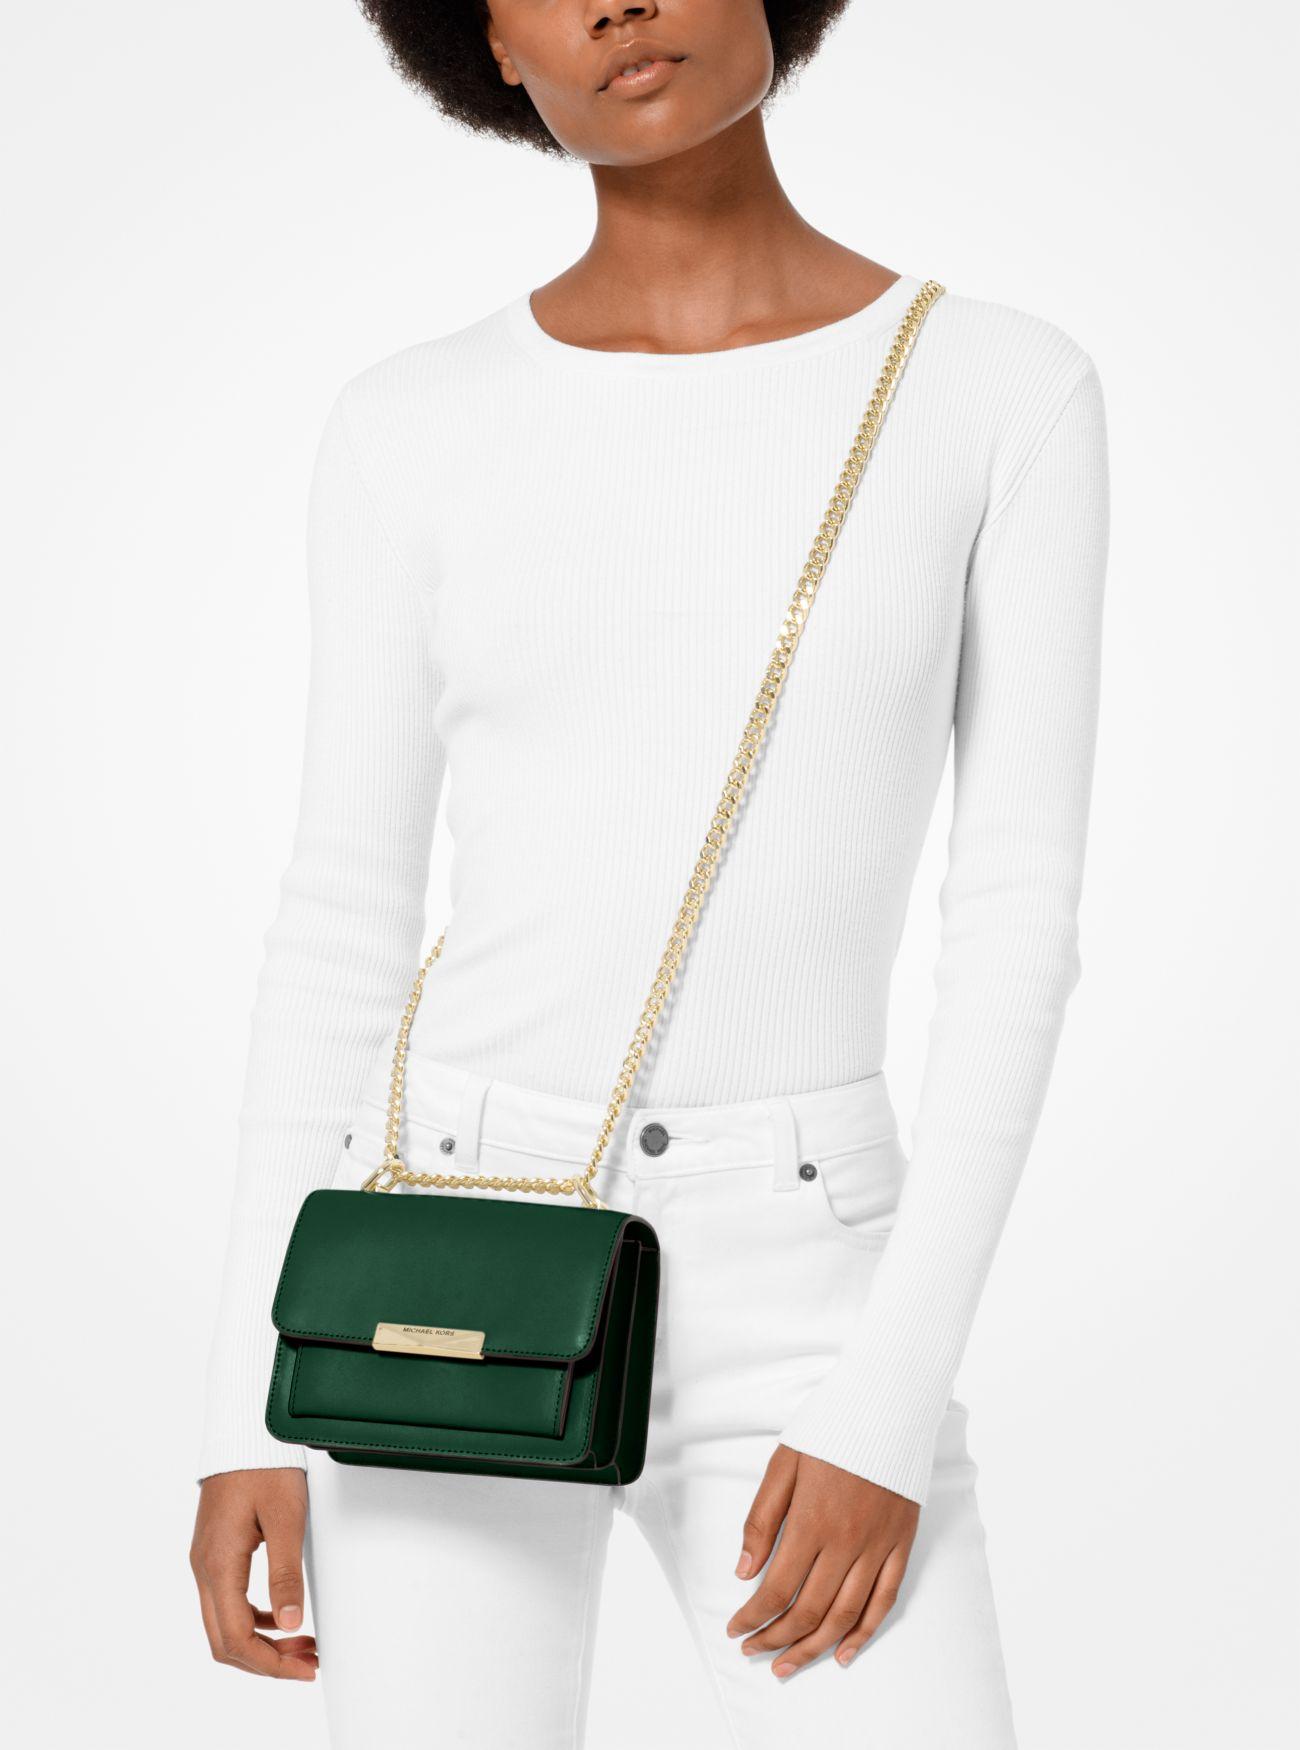 Michael Kors Jade Extra-small Leather Crossbody Bag in Moss (Green) - Lyst